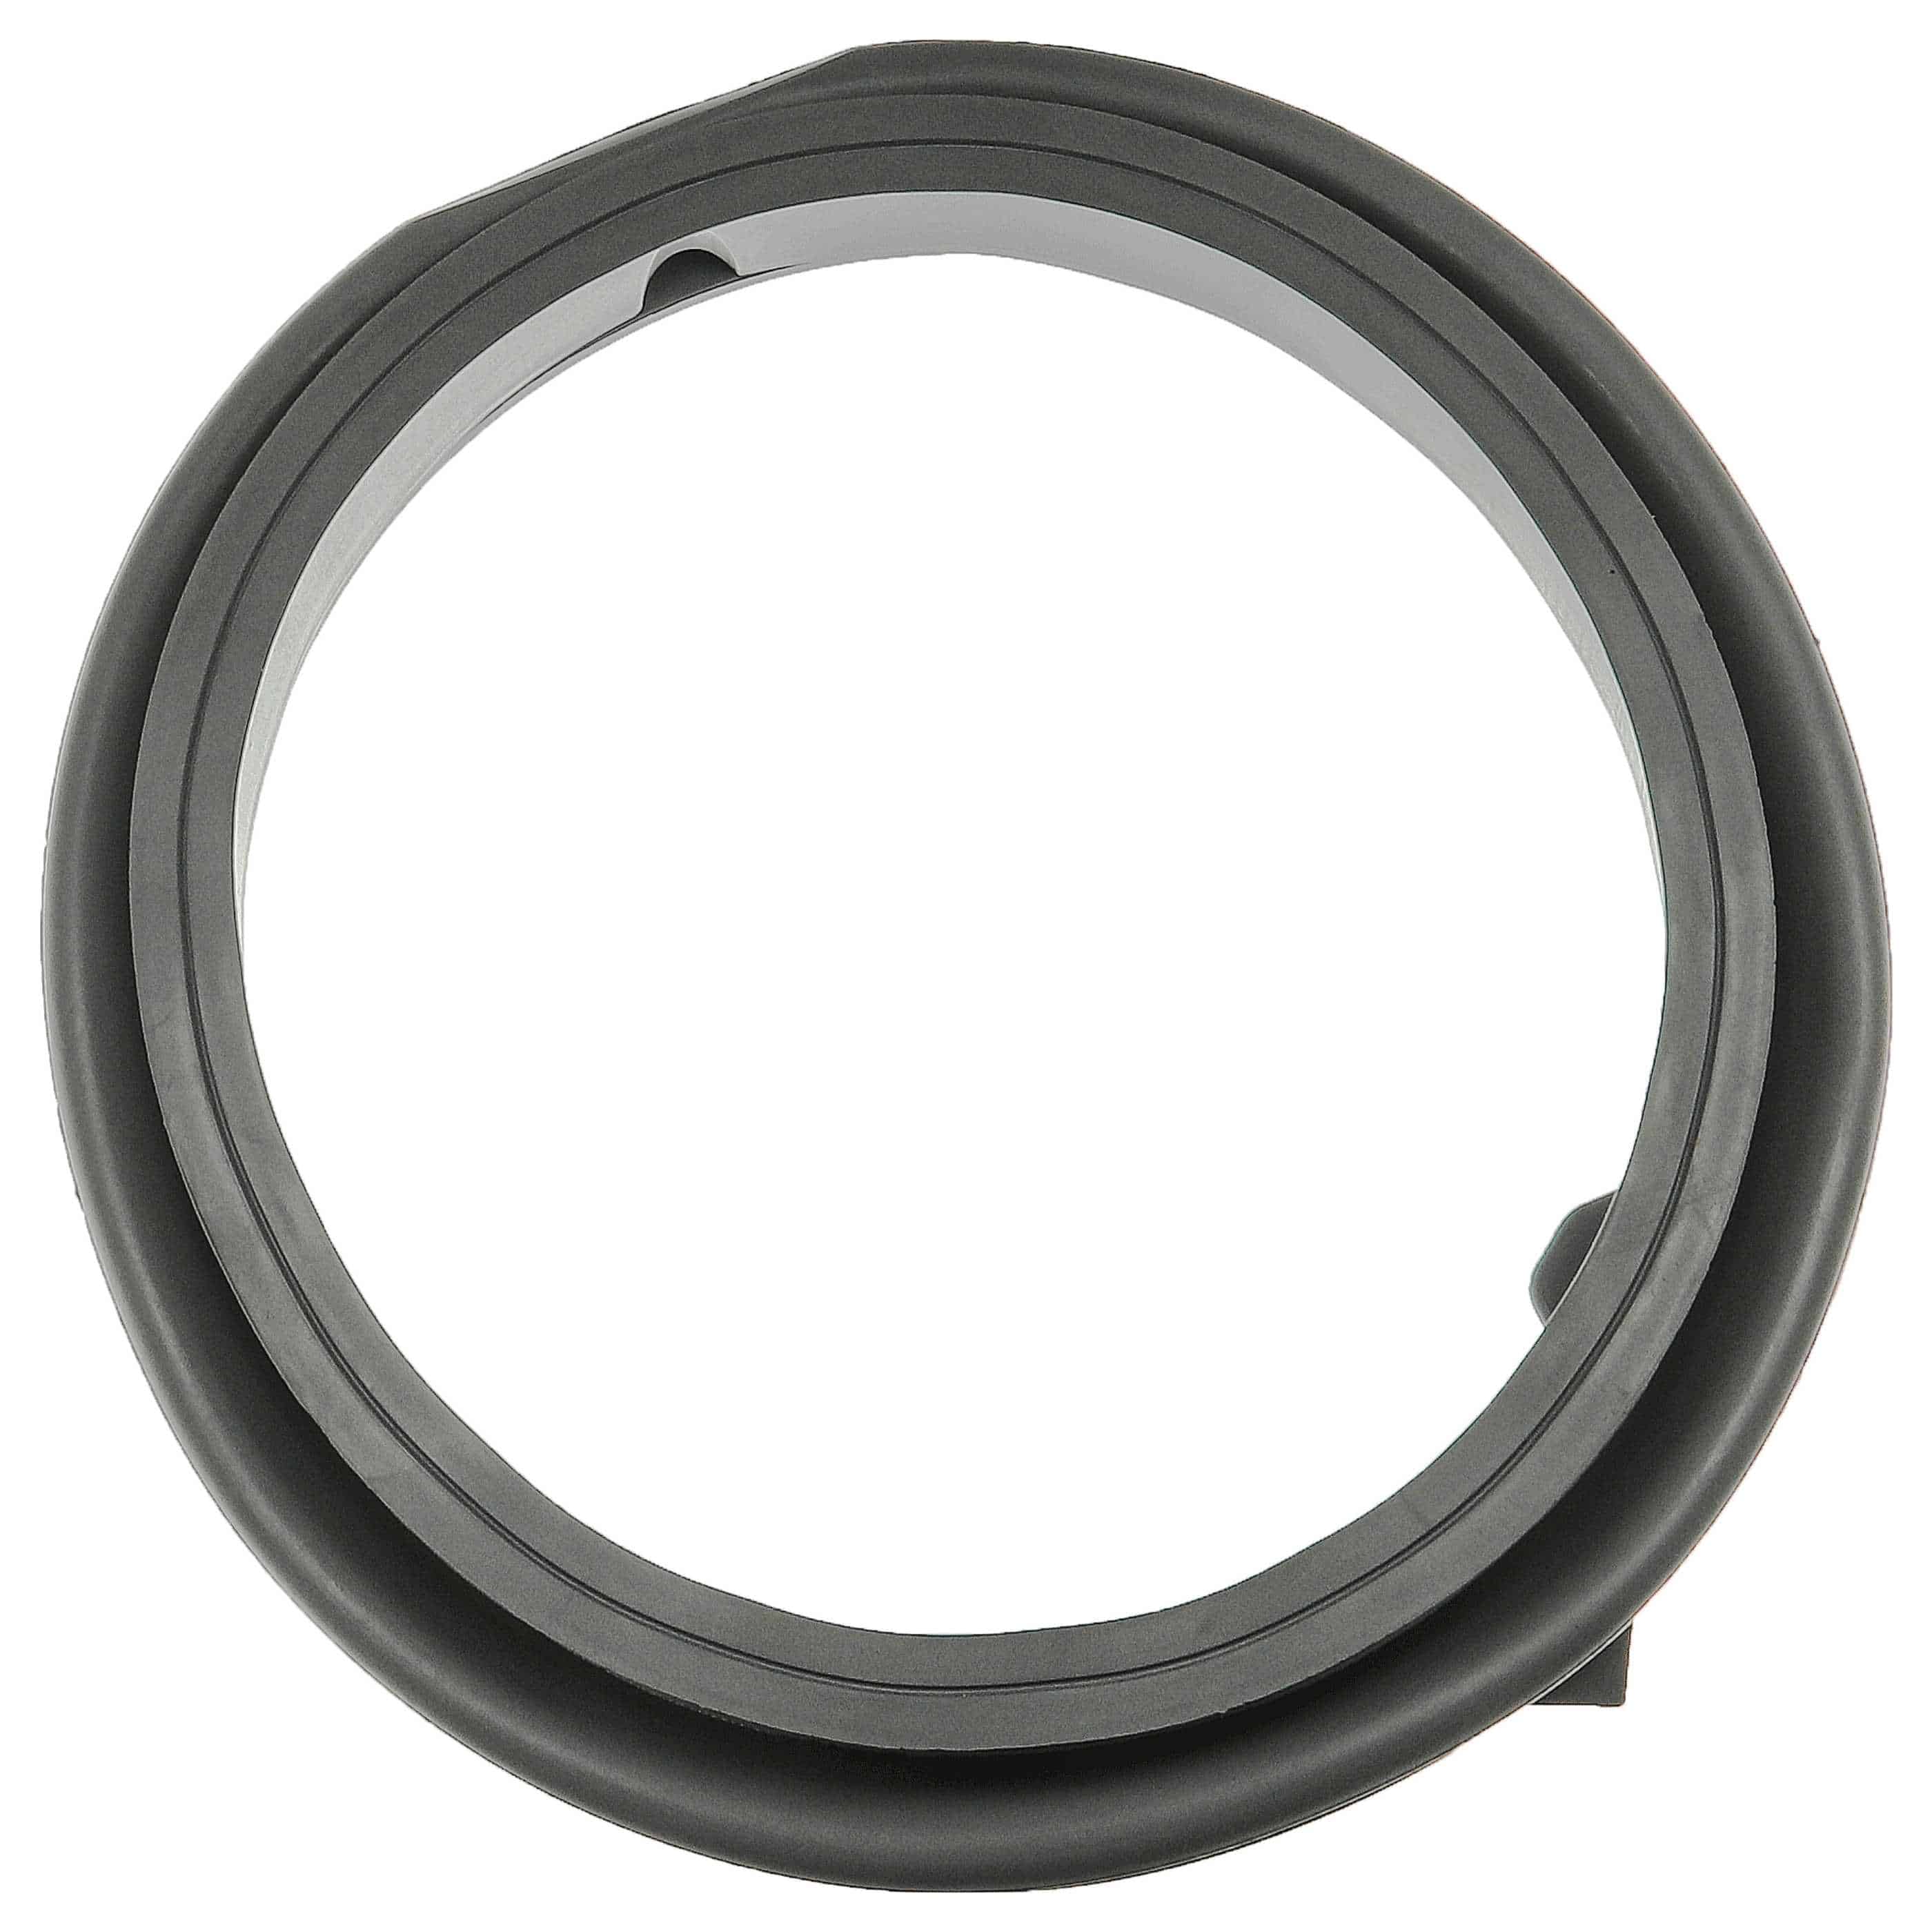 Door Seal replaces Samsung DC64-01602A for Samsung Washing Machine